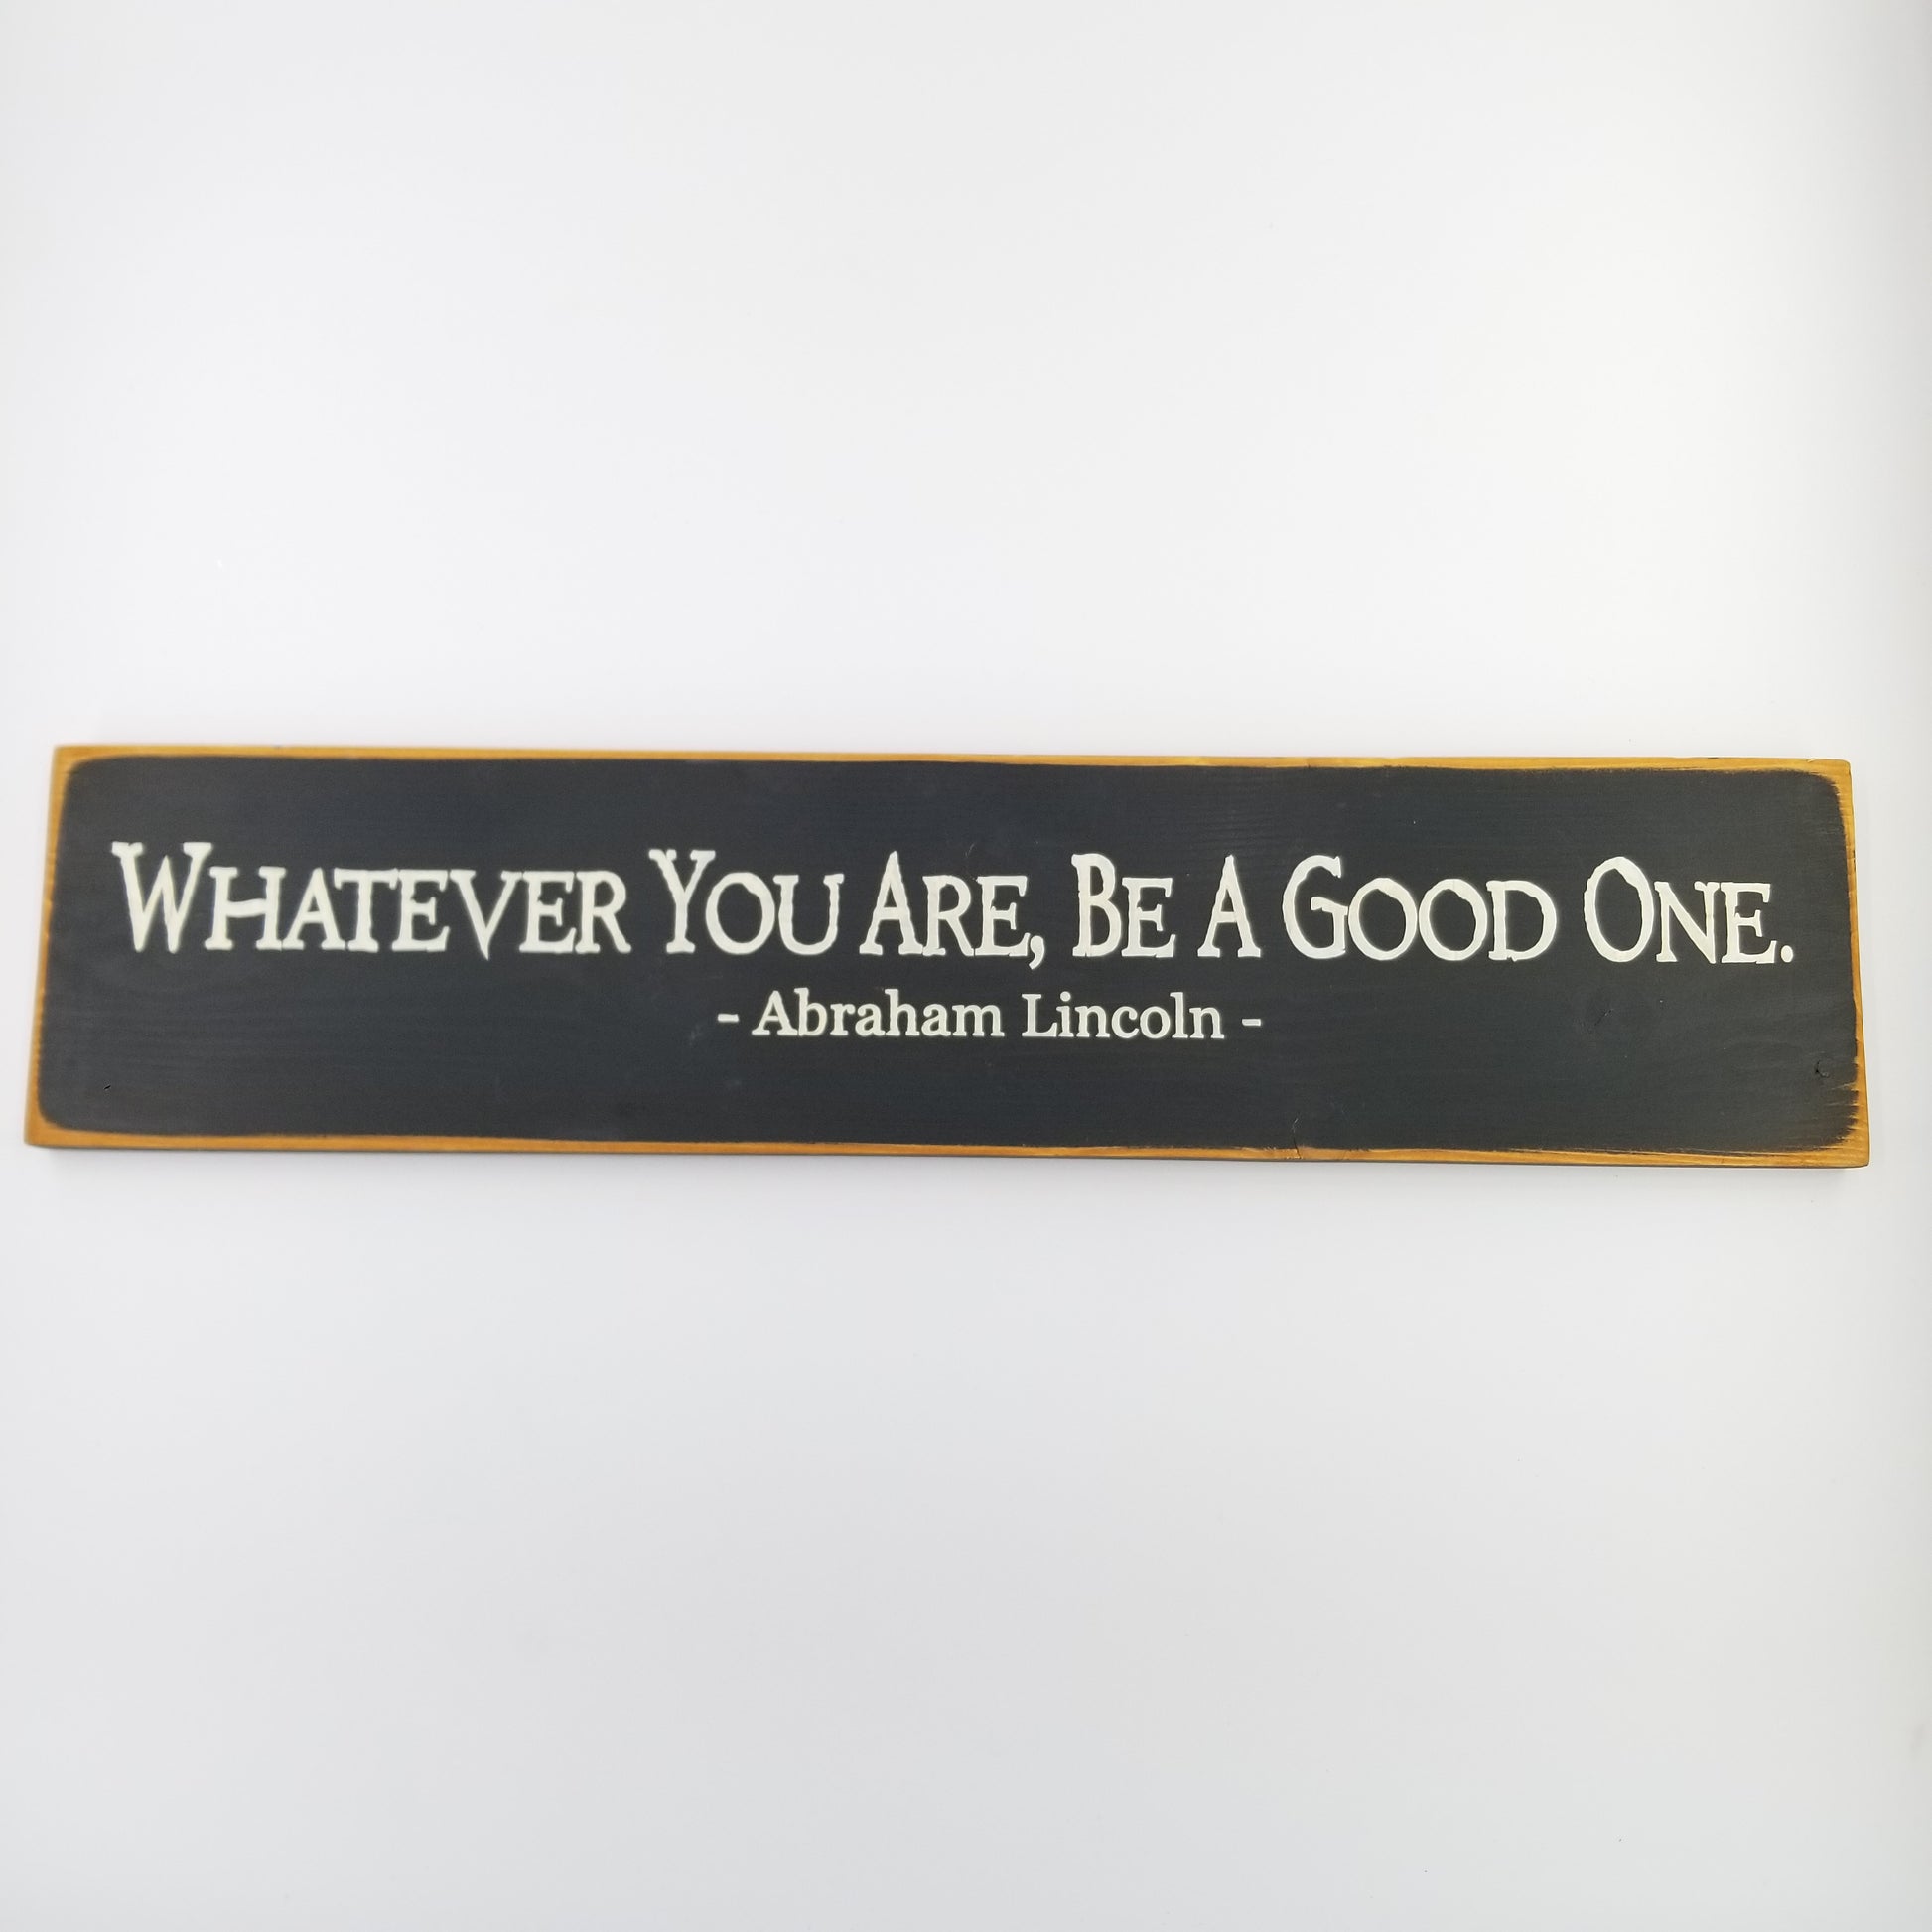 Whatever you are be a good one, Abraham Lincoln Wooden Sign